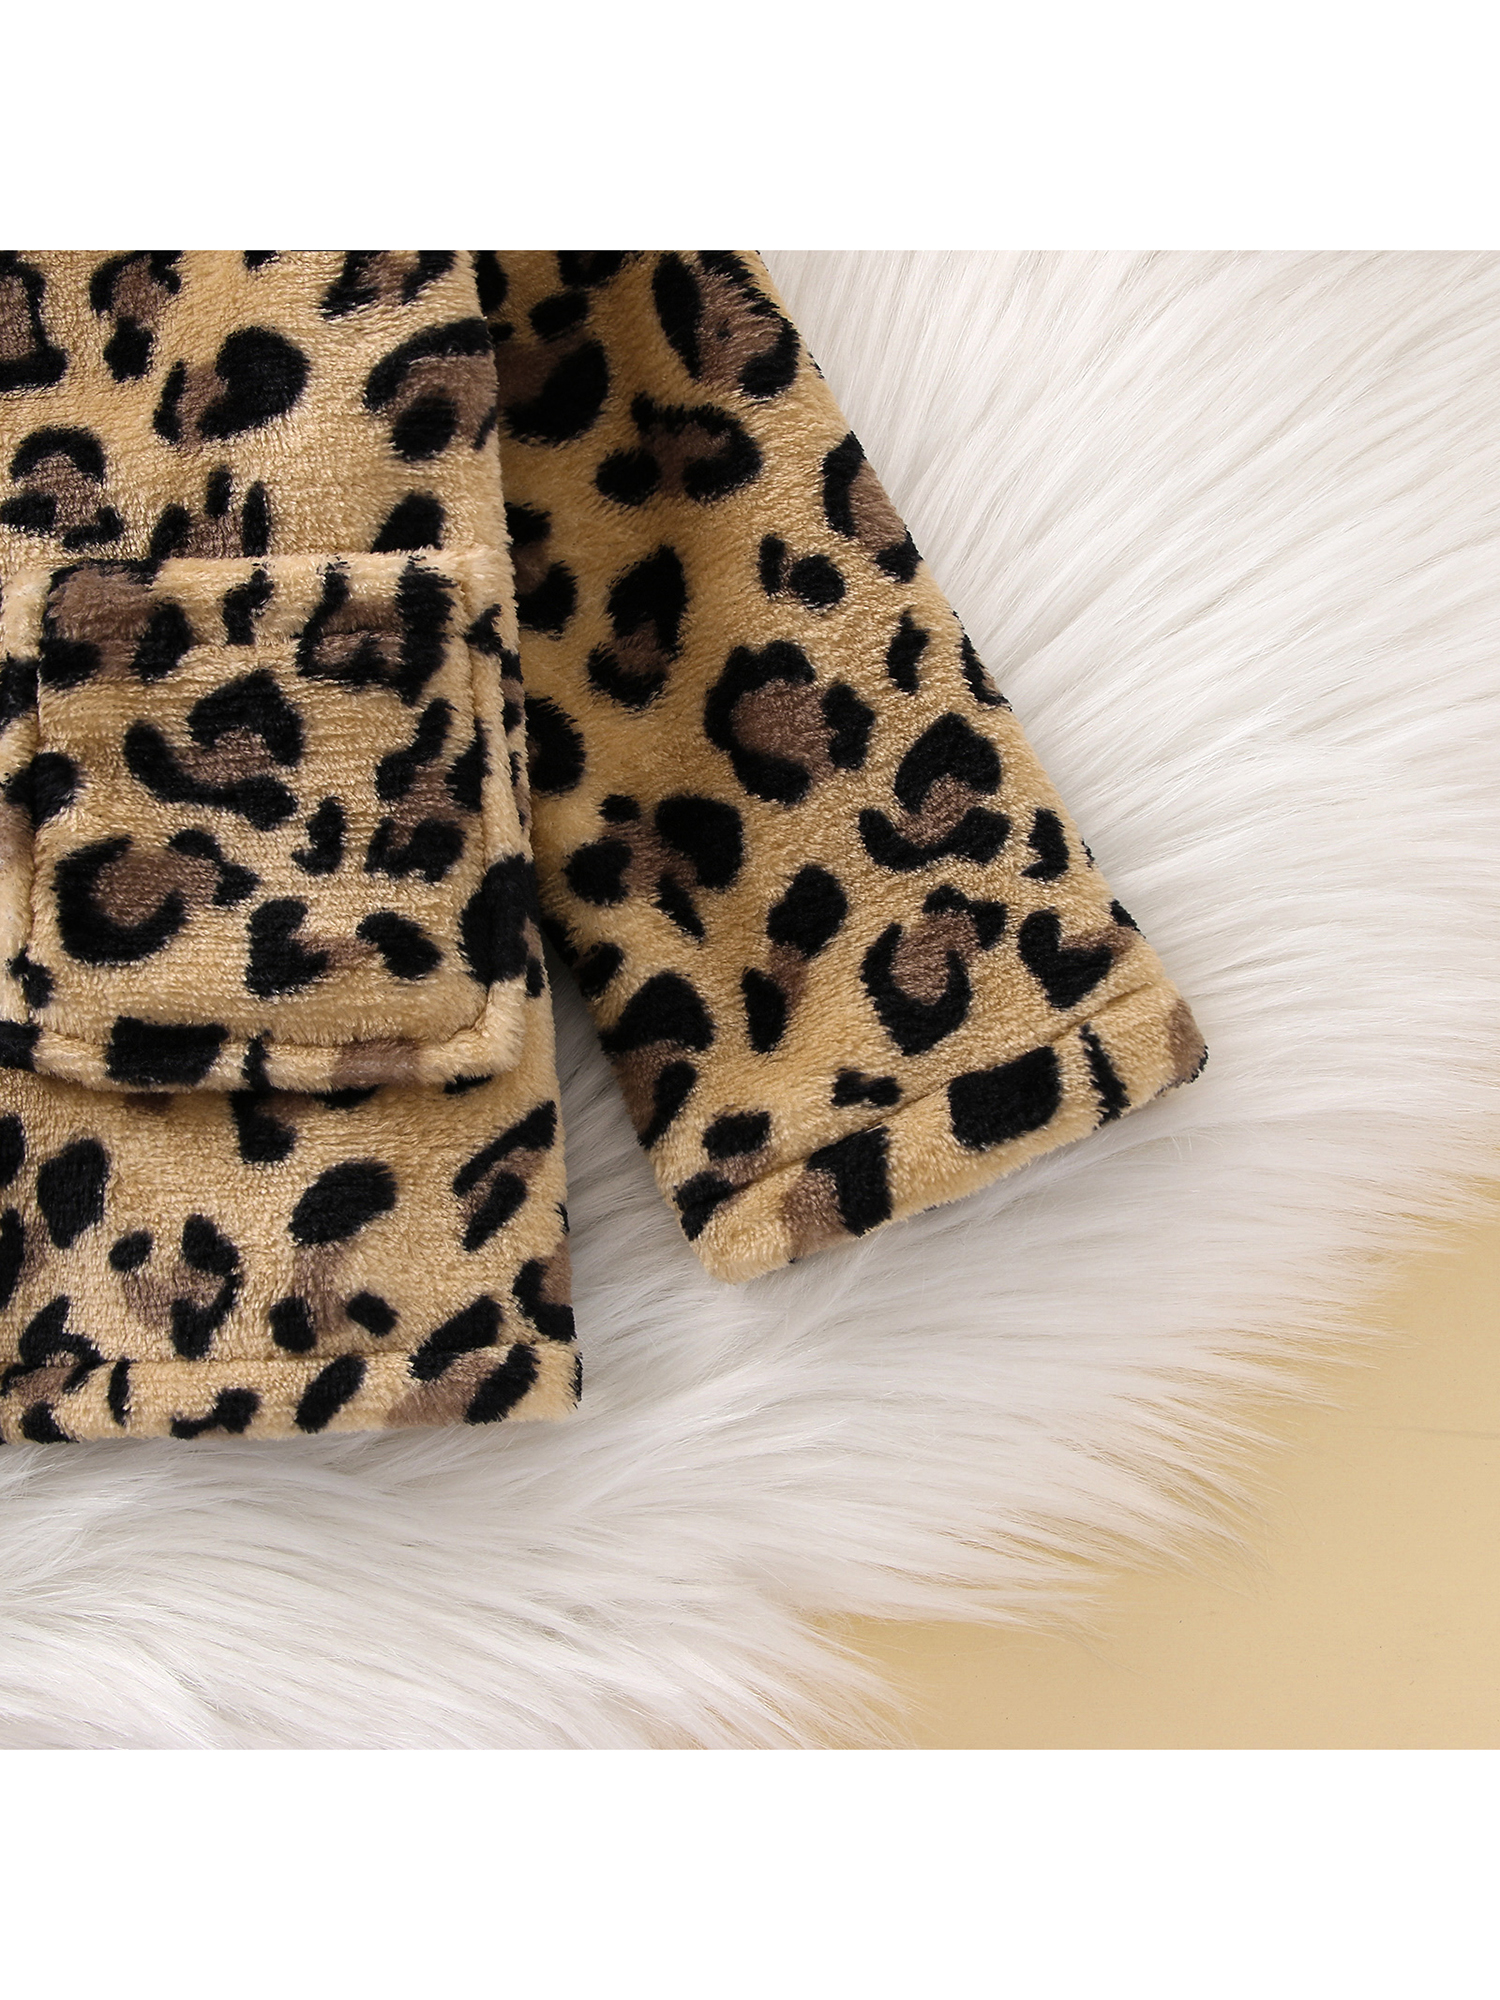 One opening Toddler Baby Winter Jacket Fashion Long Sleeve Leopard Print Button Down Plush Coat - image 5 of 9